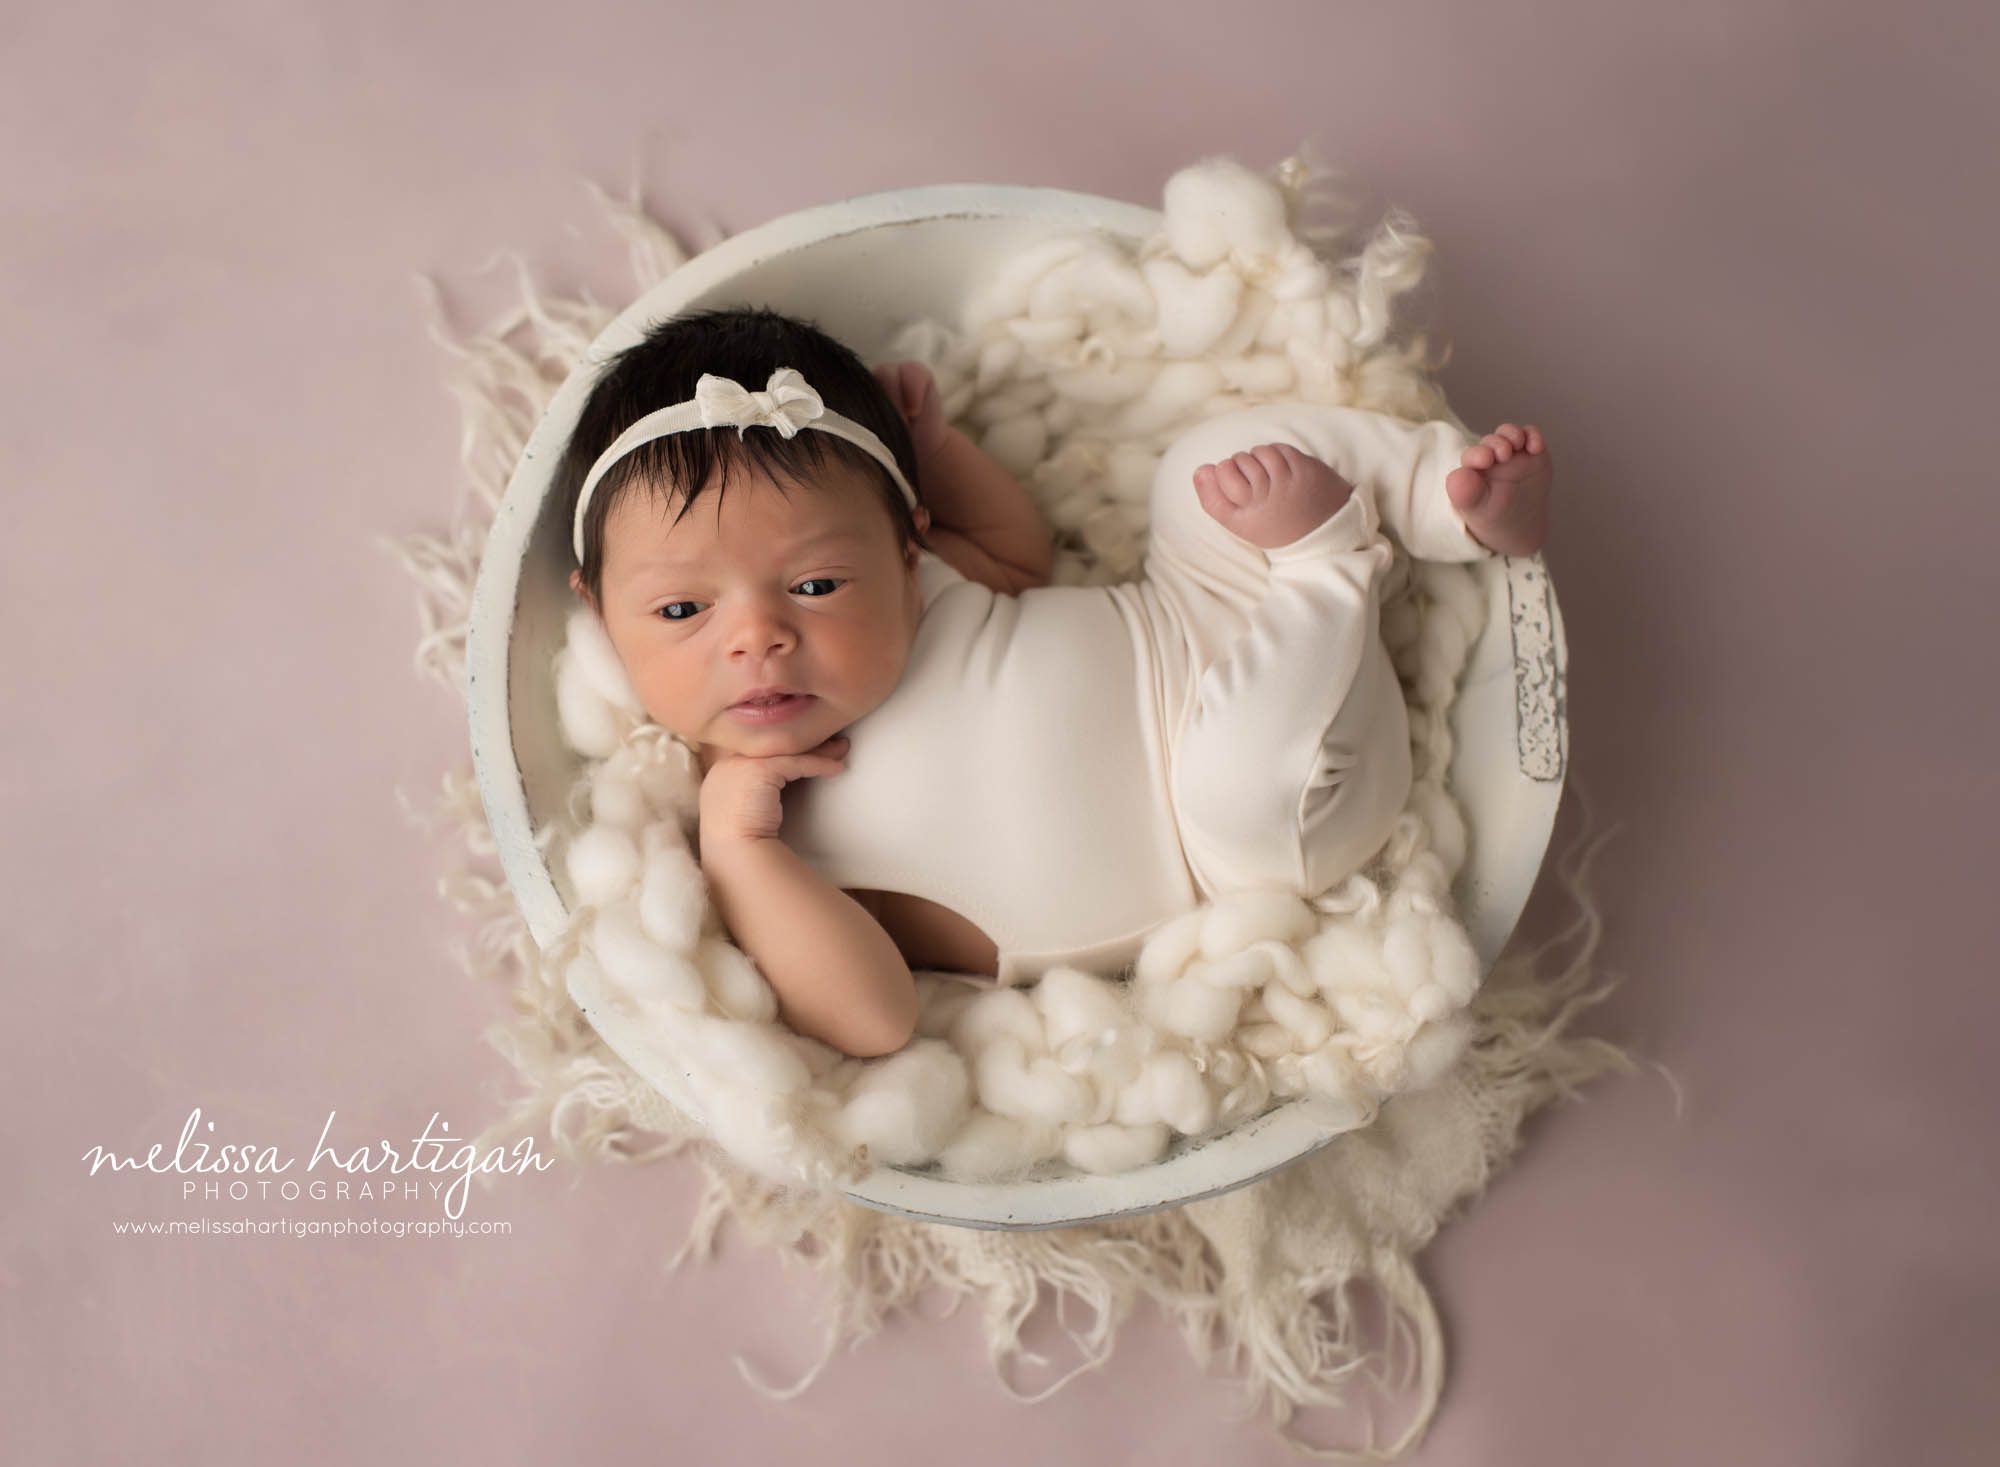 newborn baby girl wearing cream outfit posed in cream wooden bowl with cream layer fluff